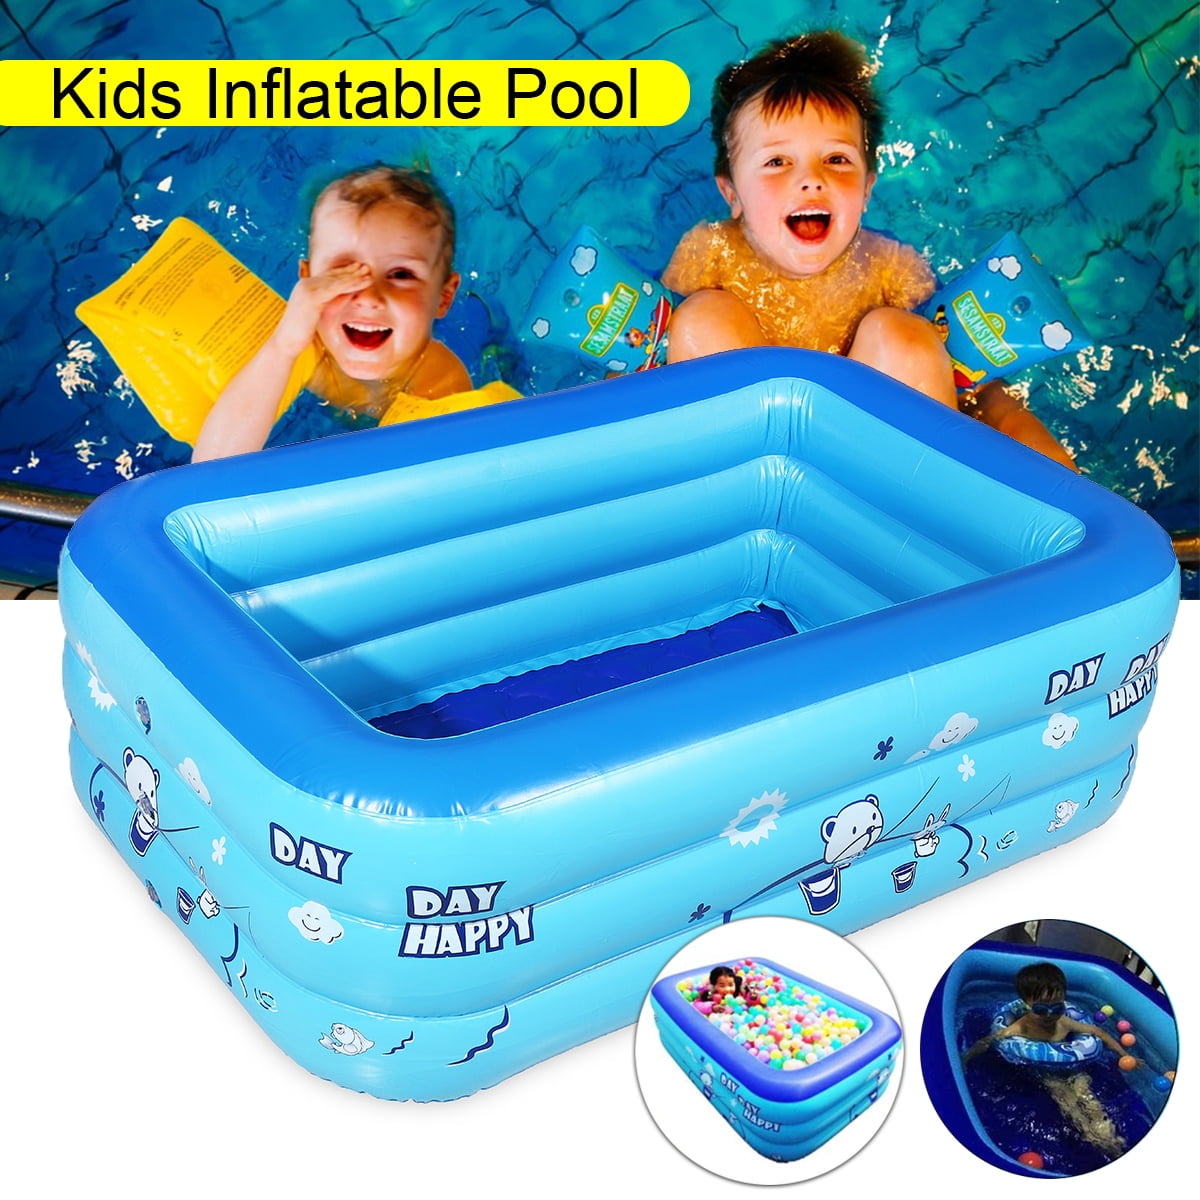 SWIMMING POOL INFLATABLE INFANTS TODDLERS 120cm NEXT DAY SHIPPING 48" 